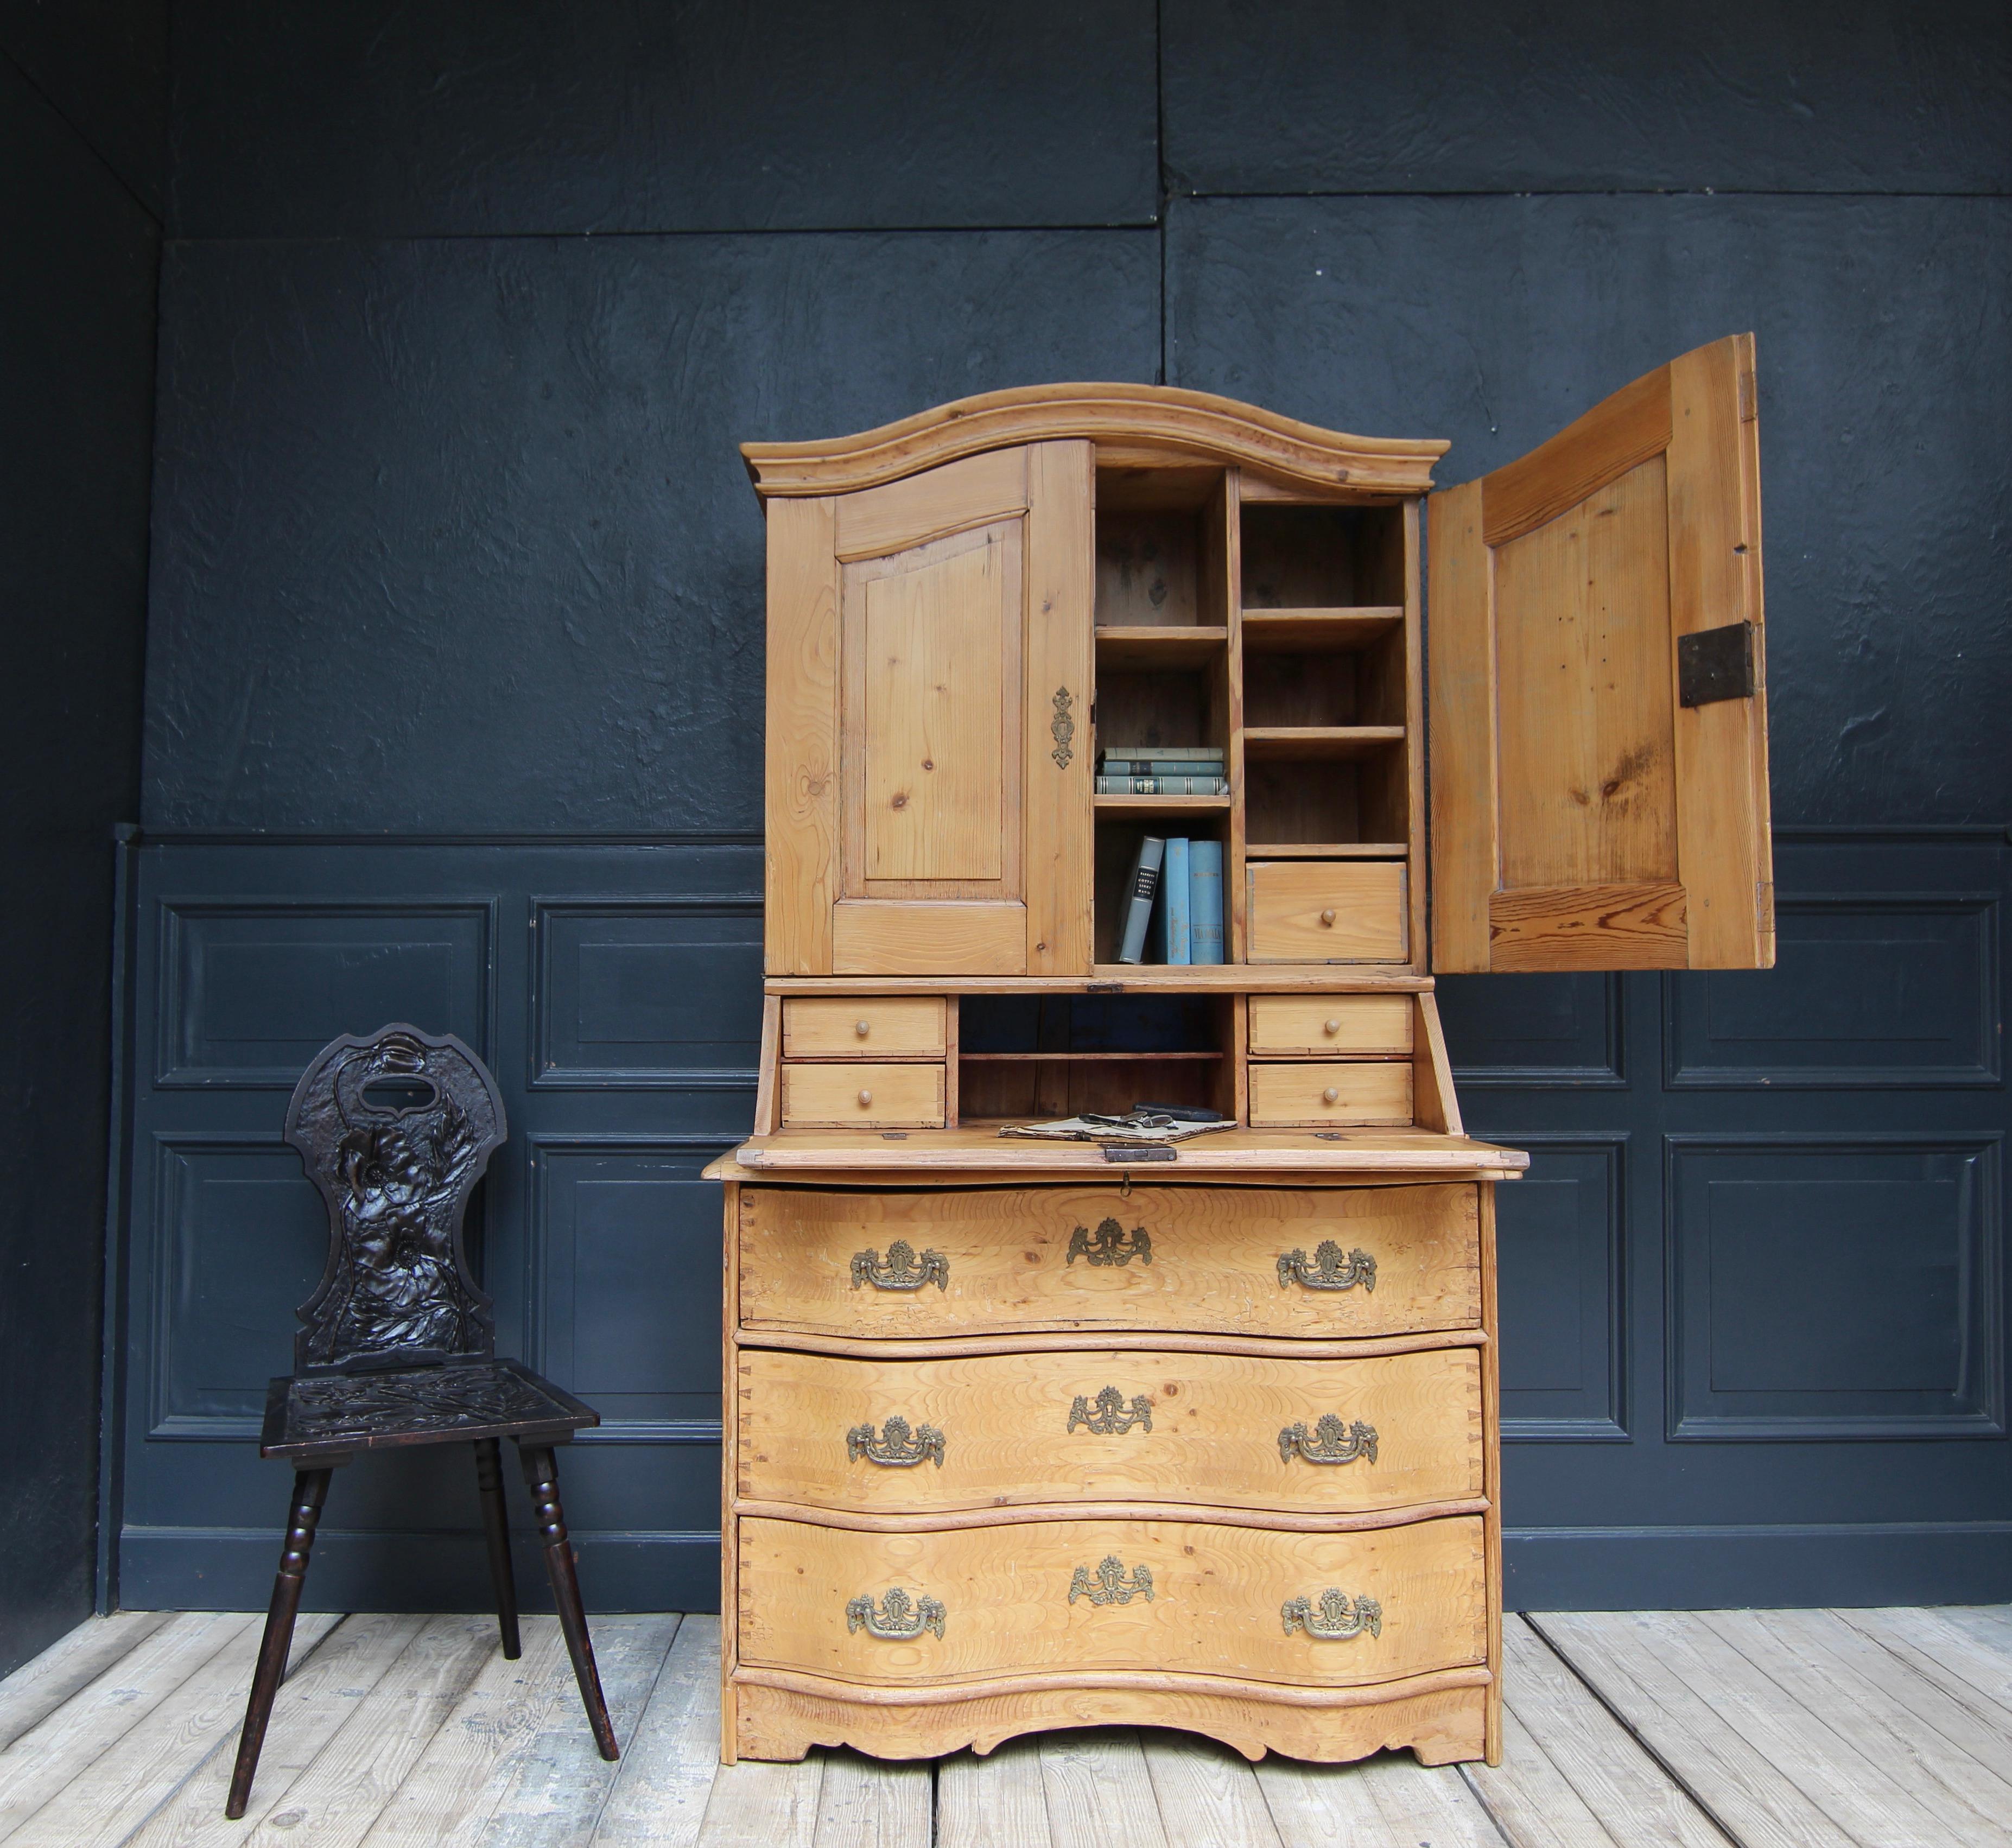 German provincial baroque secretary à deux corps from around 1750. Solid made in pine wood. 

Consisting of a three drawer commode lower part with S-shaped curved front and slightly protruding profiled top plate. On top of it the double-door upper